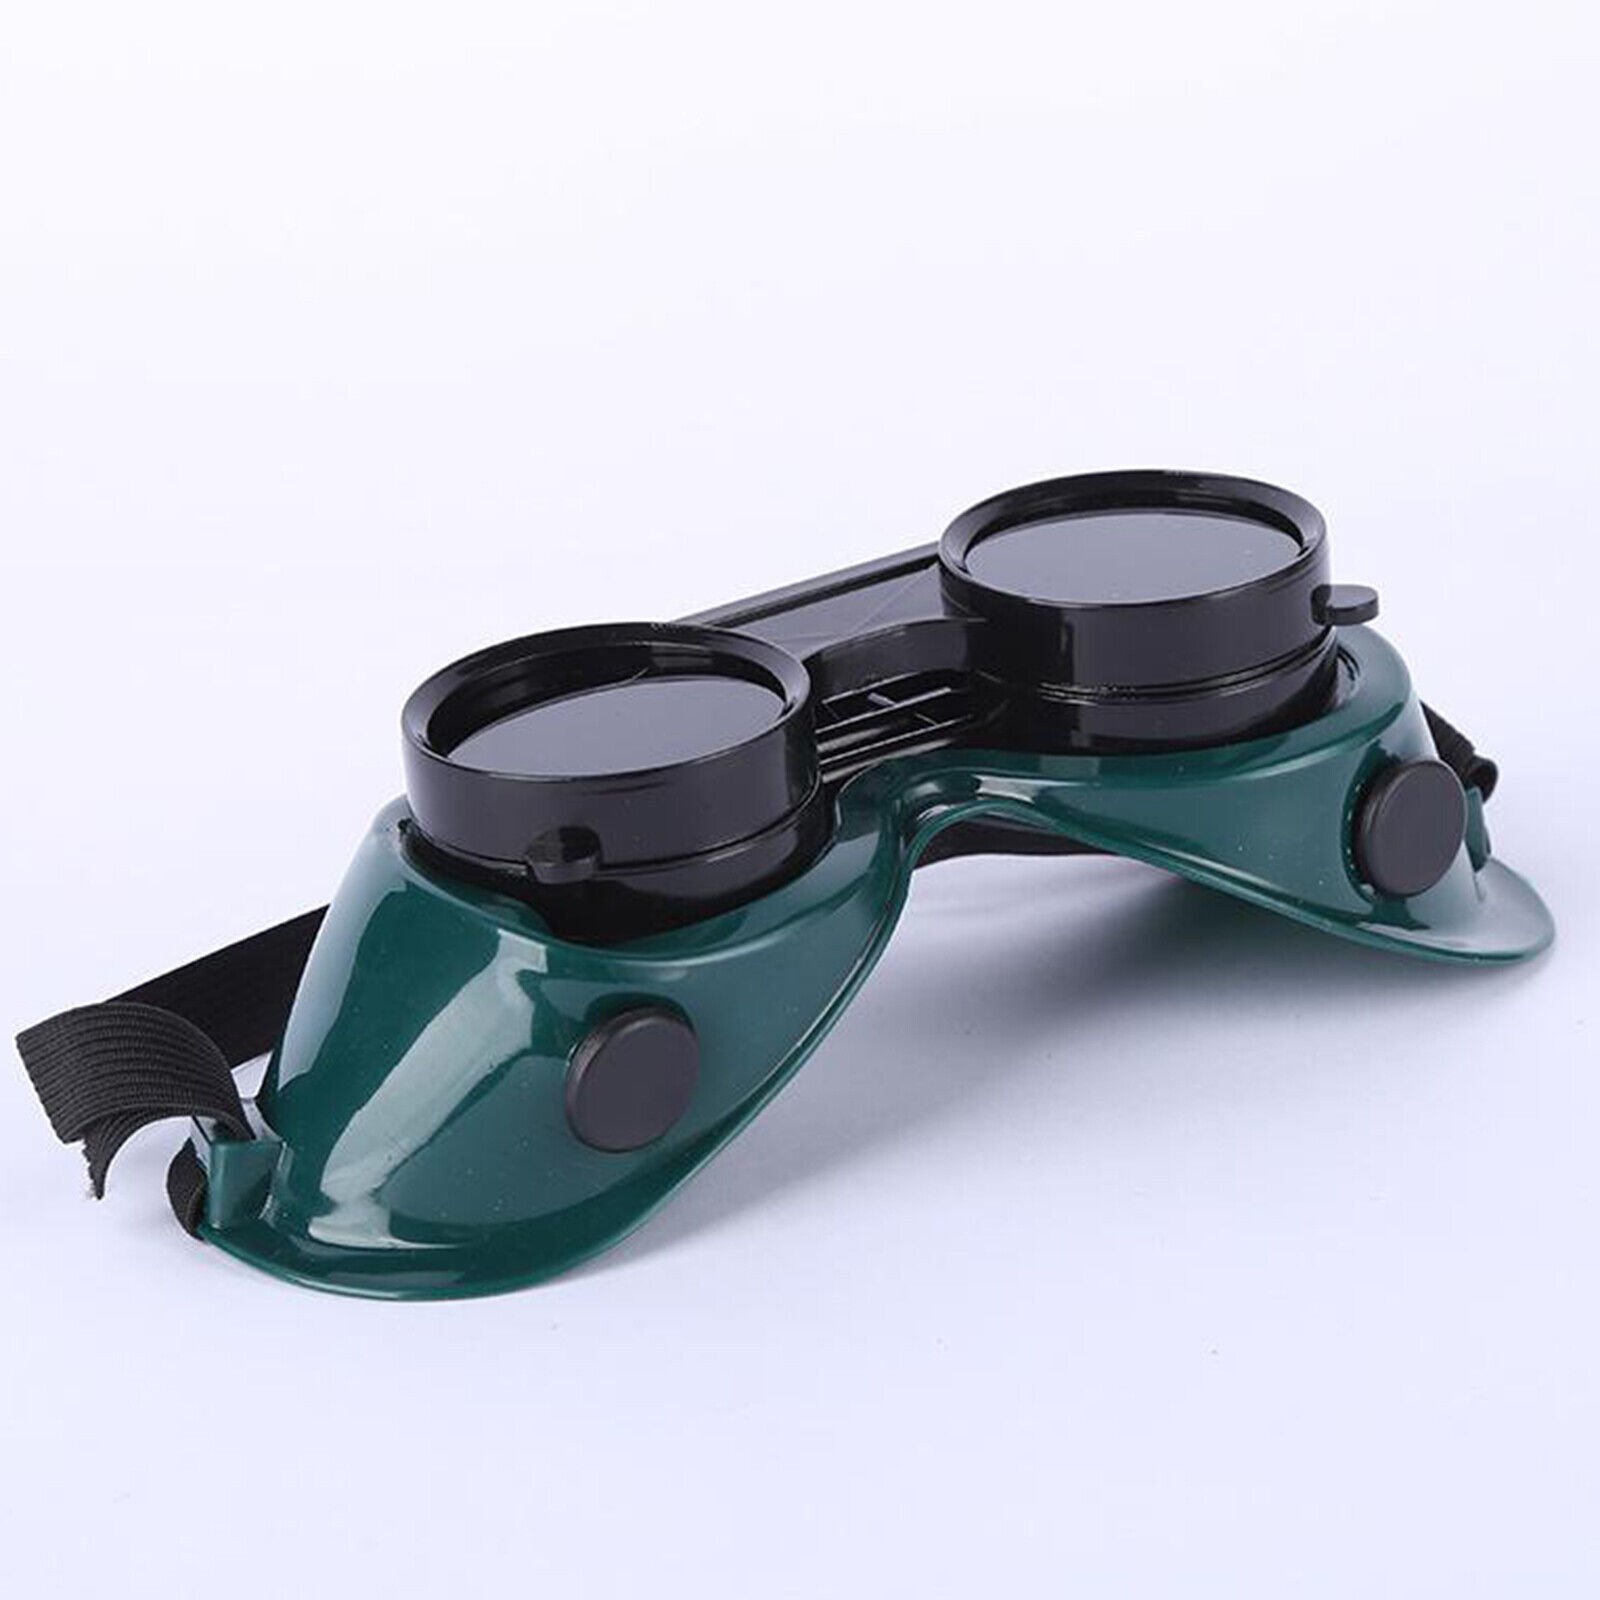 Flip-Up New arrival Front Welding Goggles Glasses Selling So Protective for